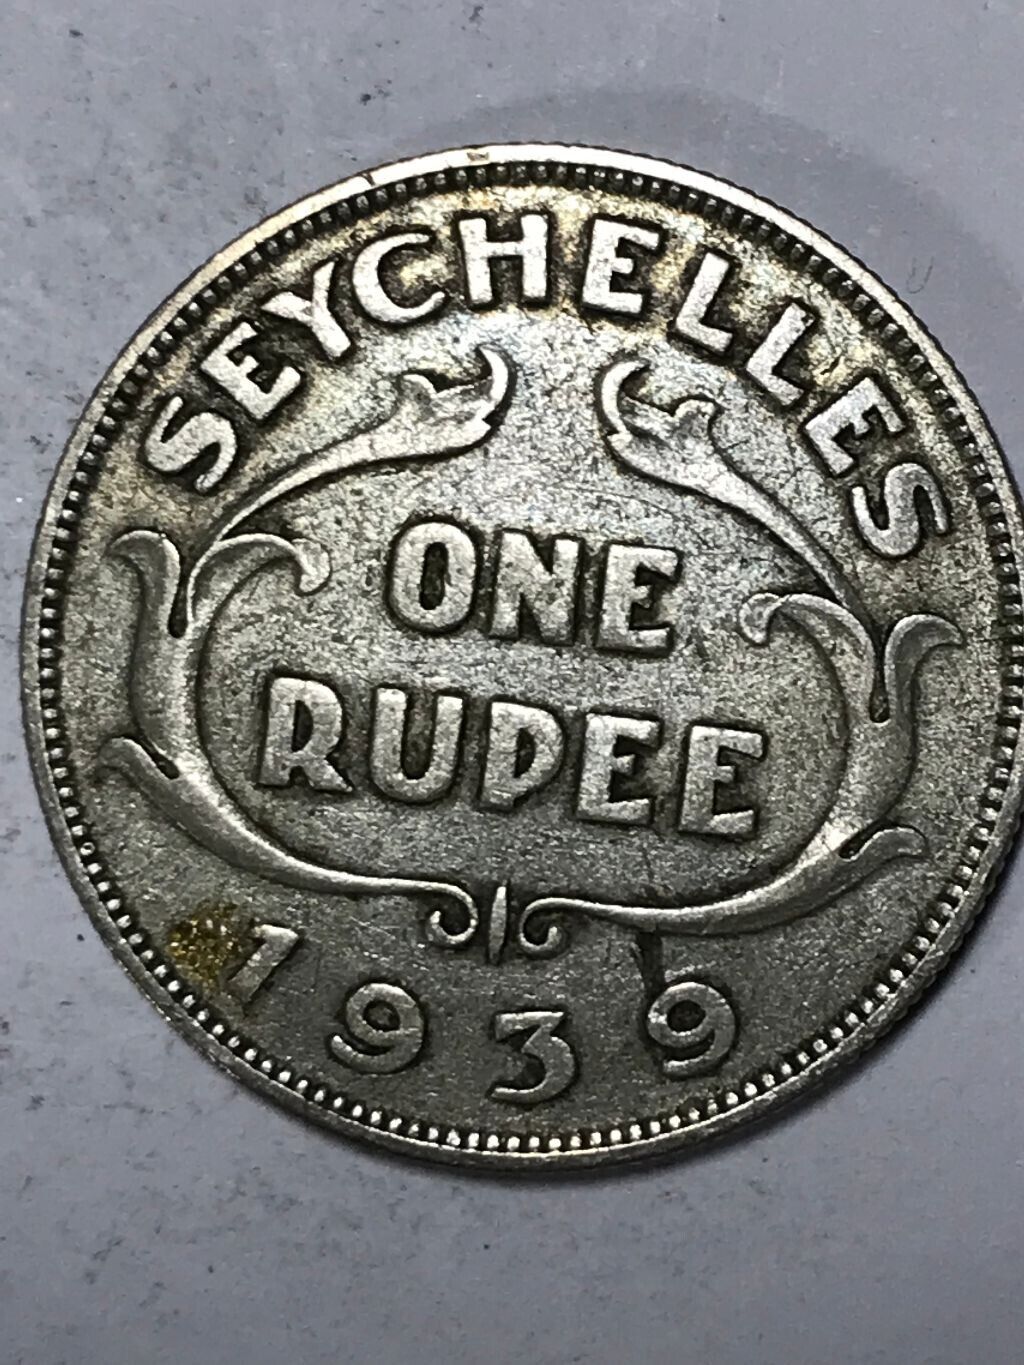 1939 1 Rupee (.500 Silver) Seychelles Coin (mintage 90k)